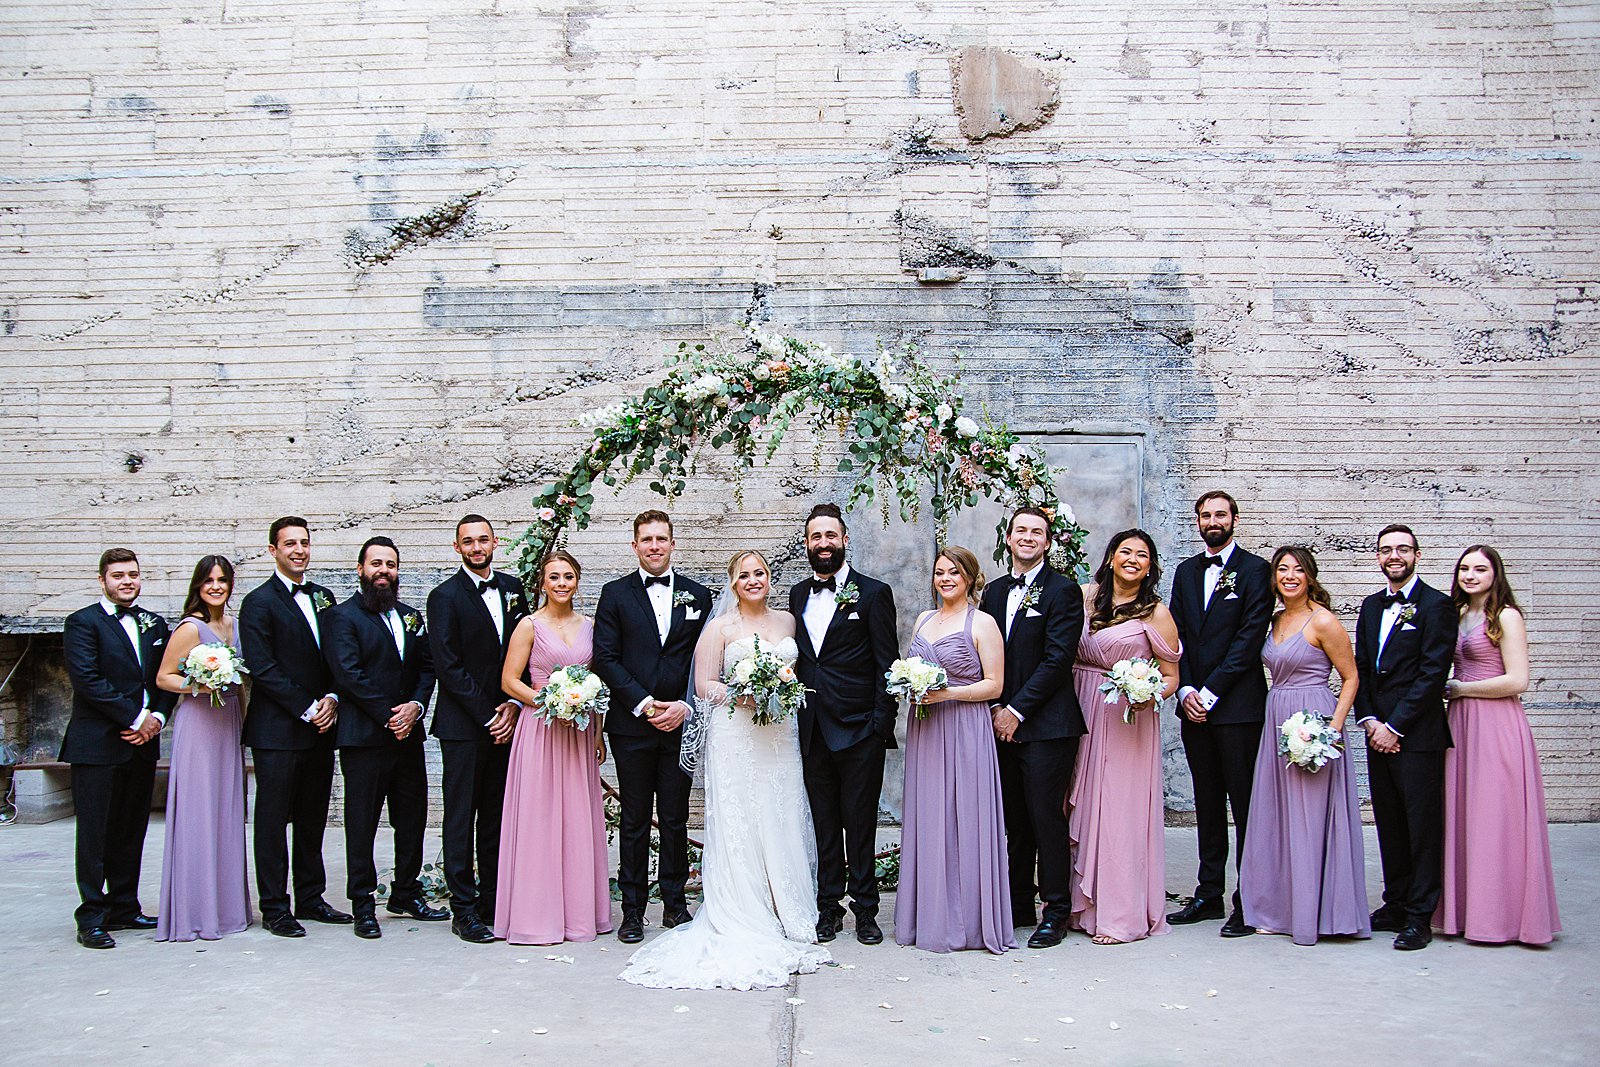 Bridal party together at a The Ice House wedding by Arizona wedding photographer PMA Photography.